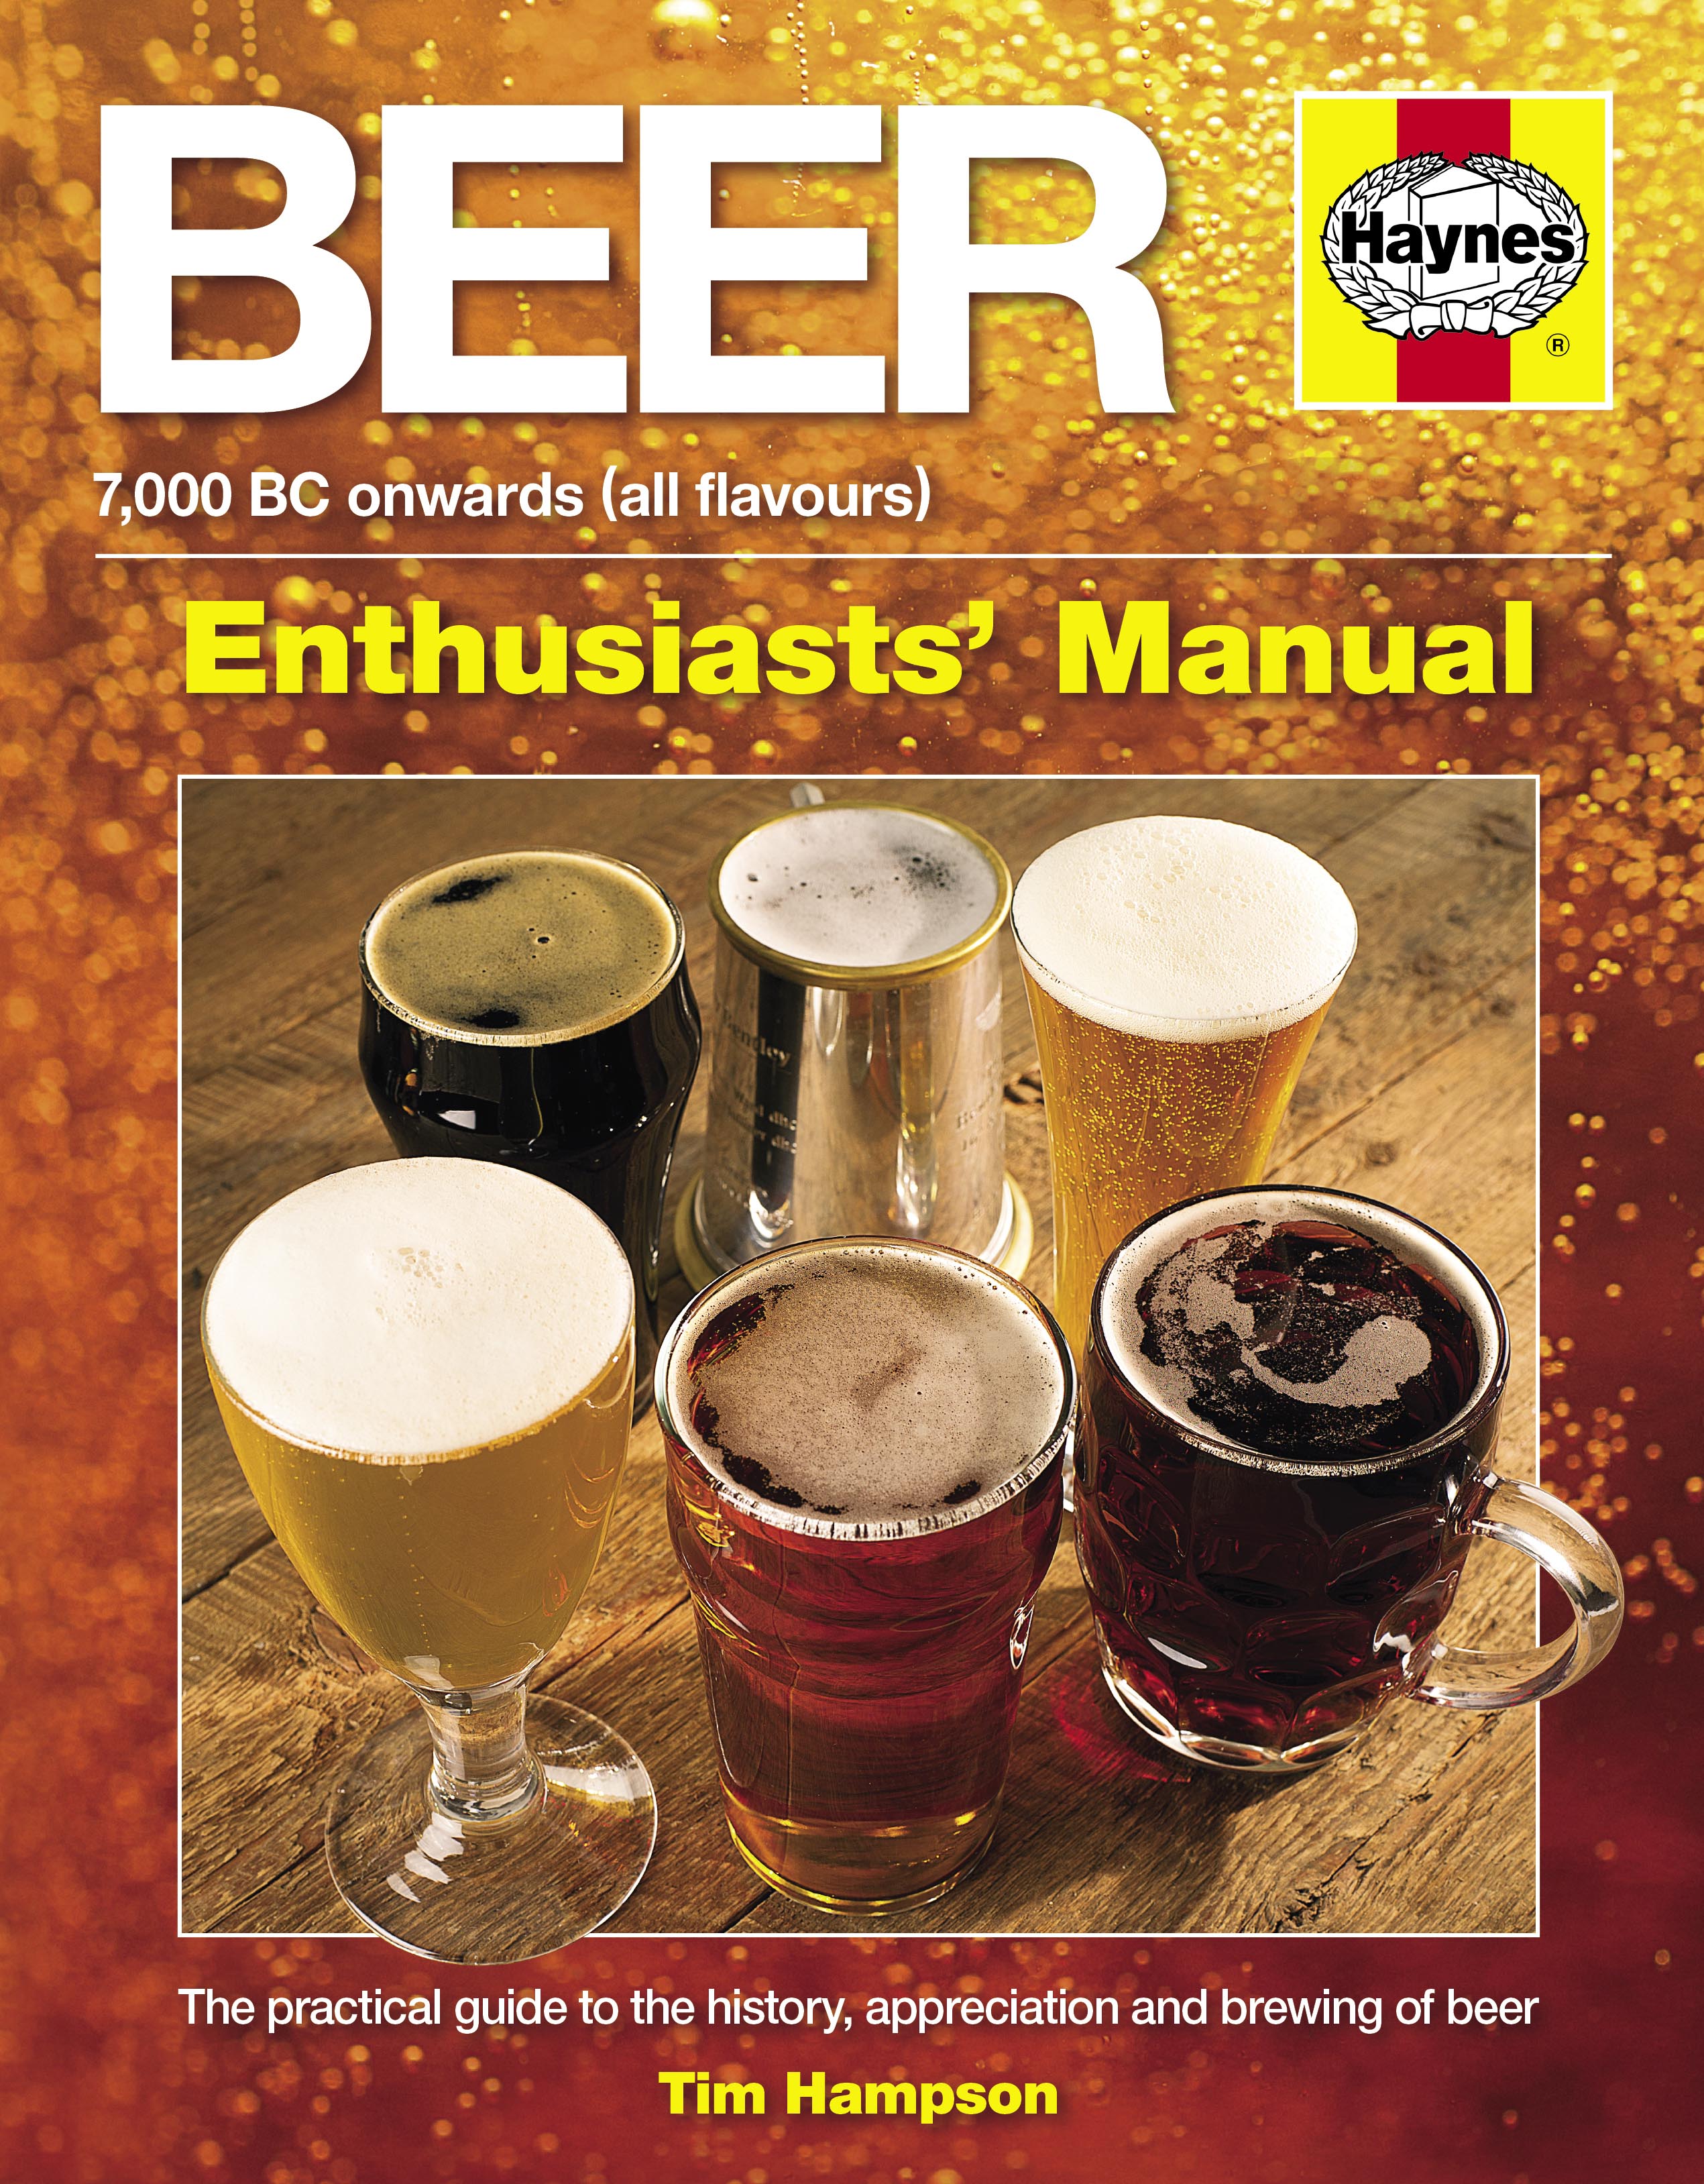 Beer Enthusiasts’ Manual